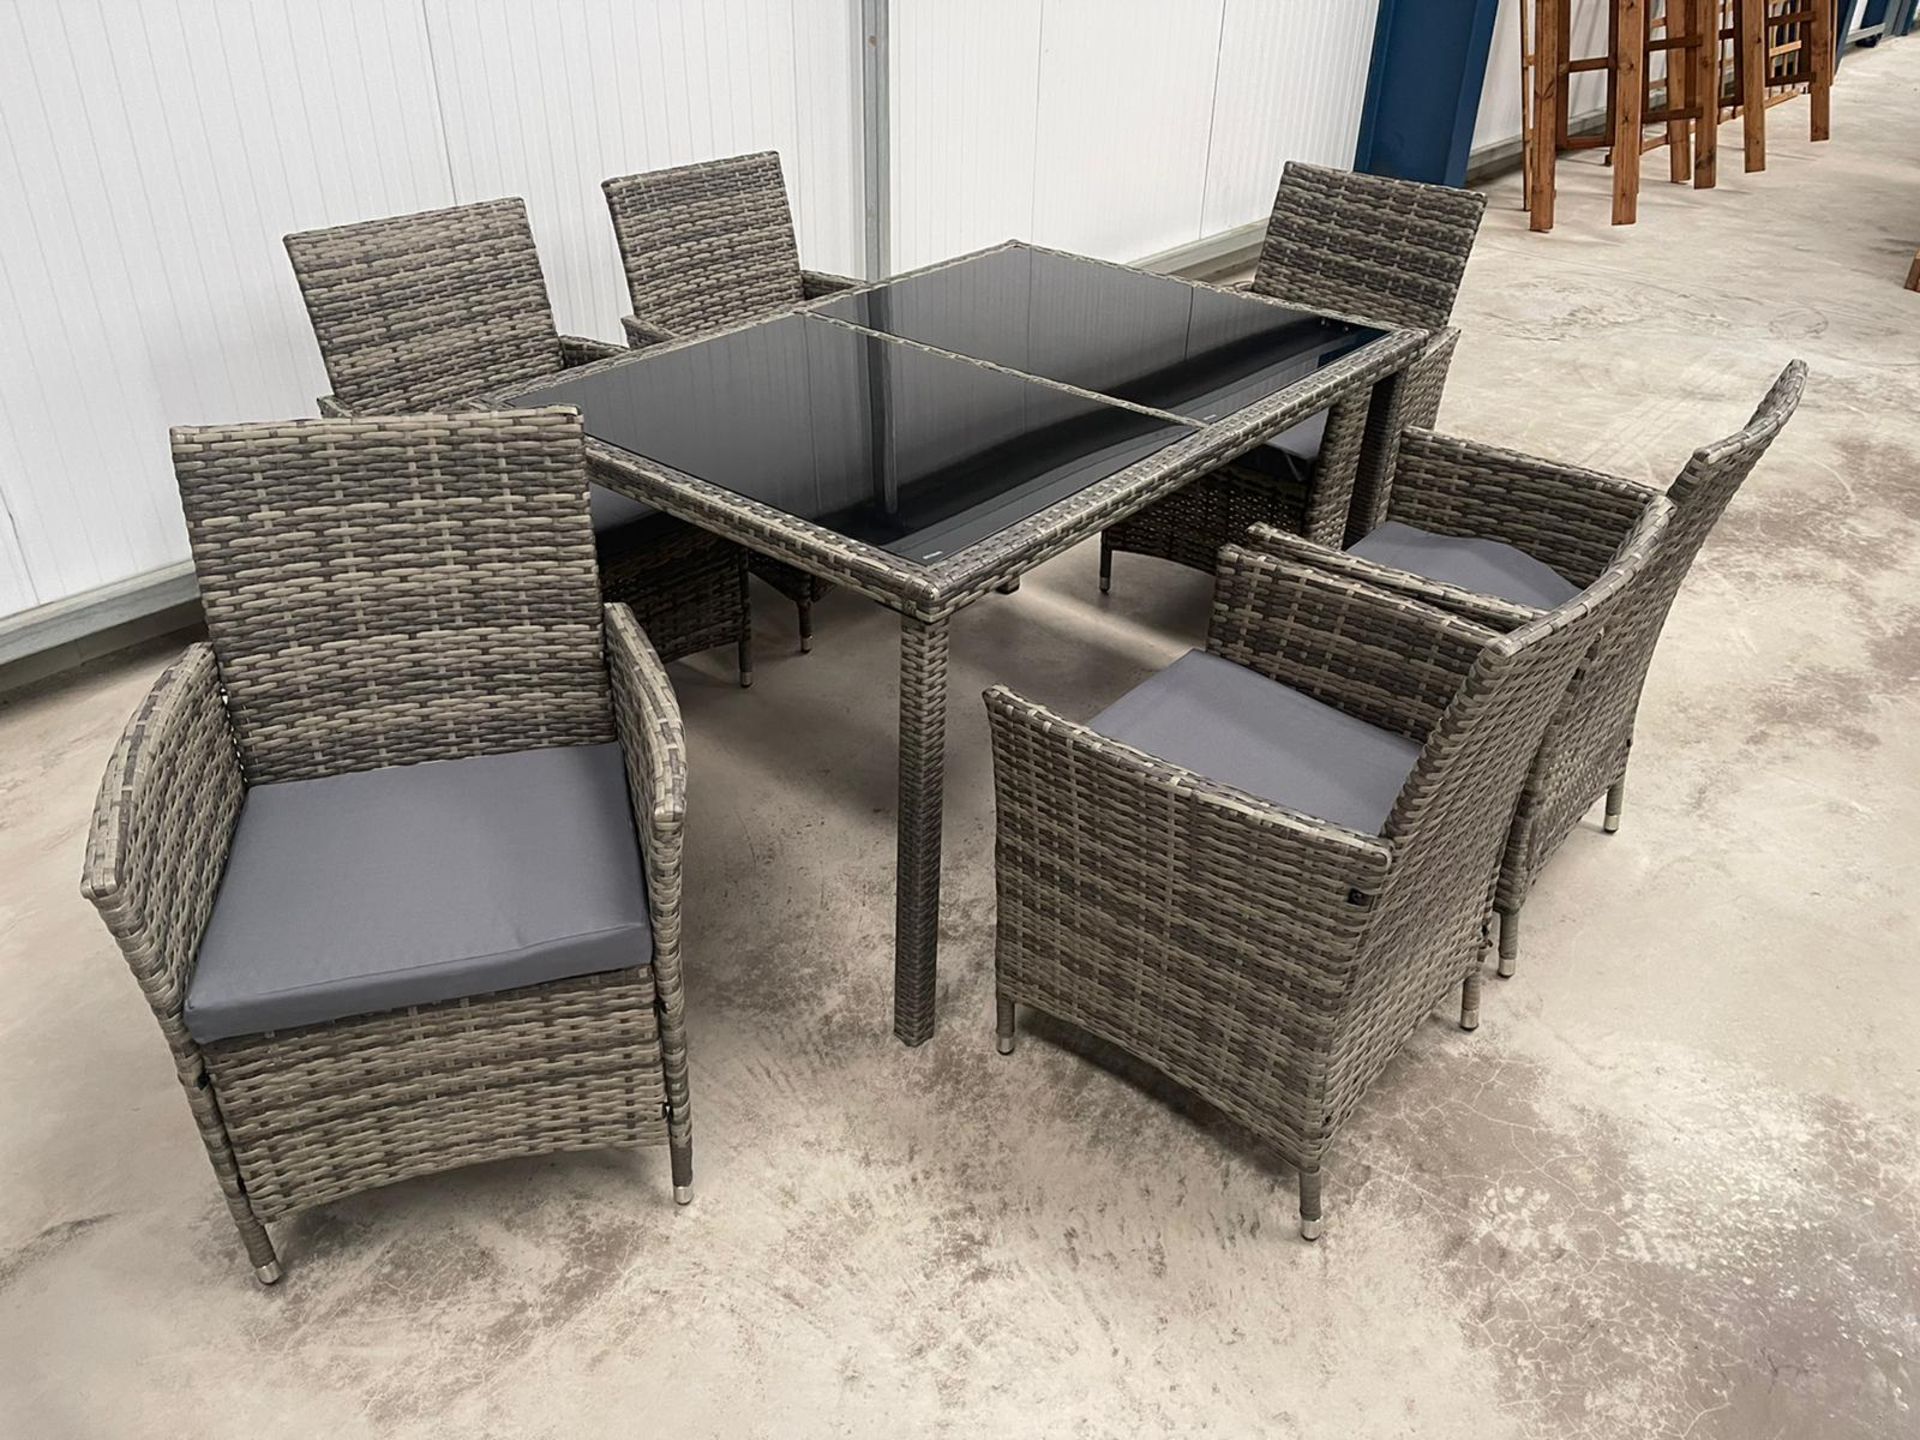 RRP £999 - NEW GREY SIX SEAT DINING SET WITH SIX CHAIRS - LUXURY BLACK GLASS TOPPED DINING TABLE AND - Image 3 of 4